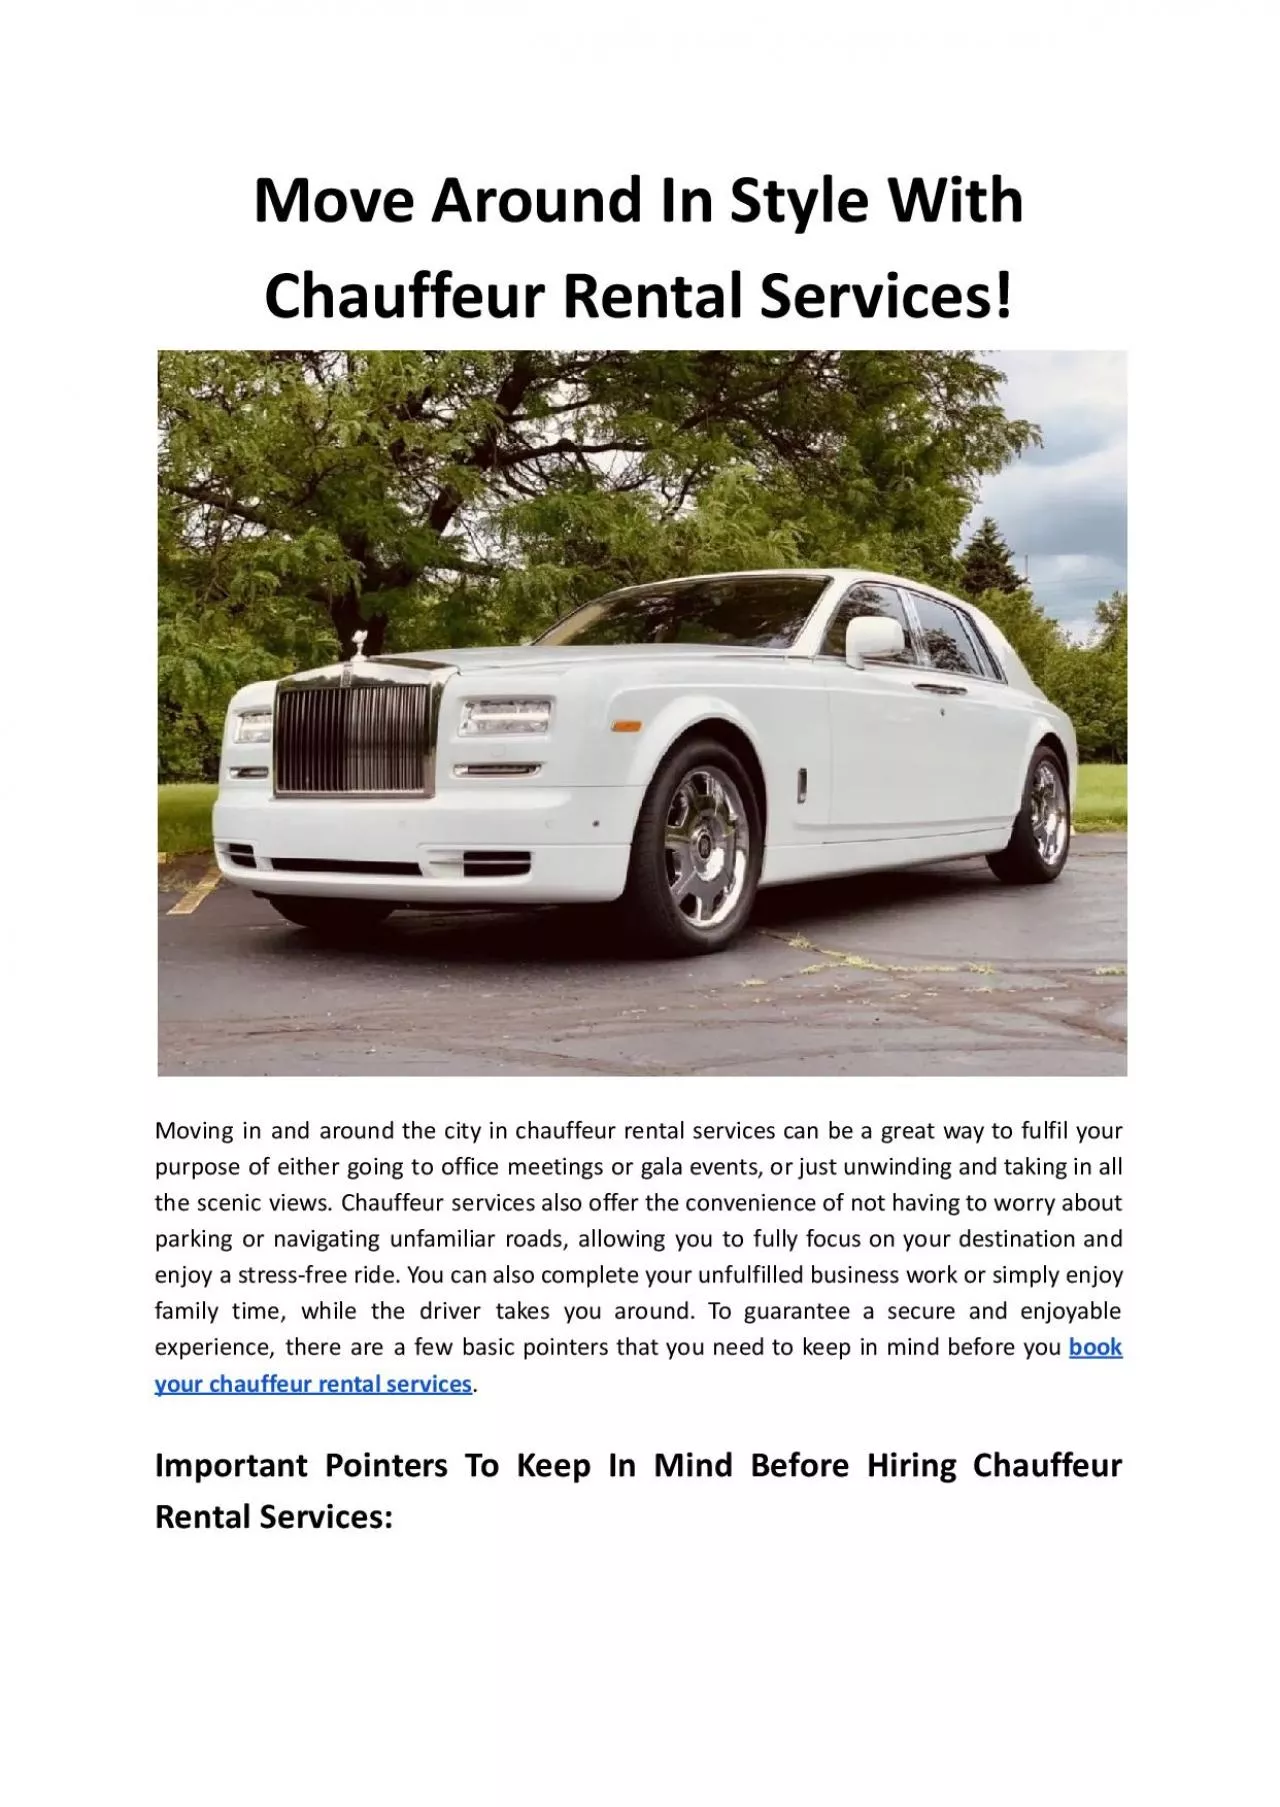 Move Around In Style With Chauffeur Rental Services - MKL Chauffeurs